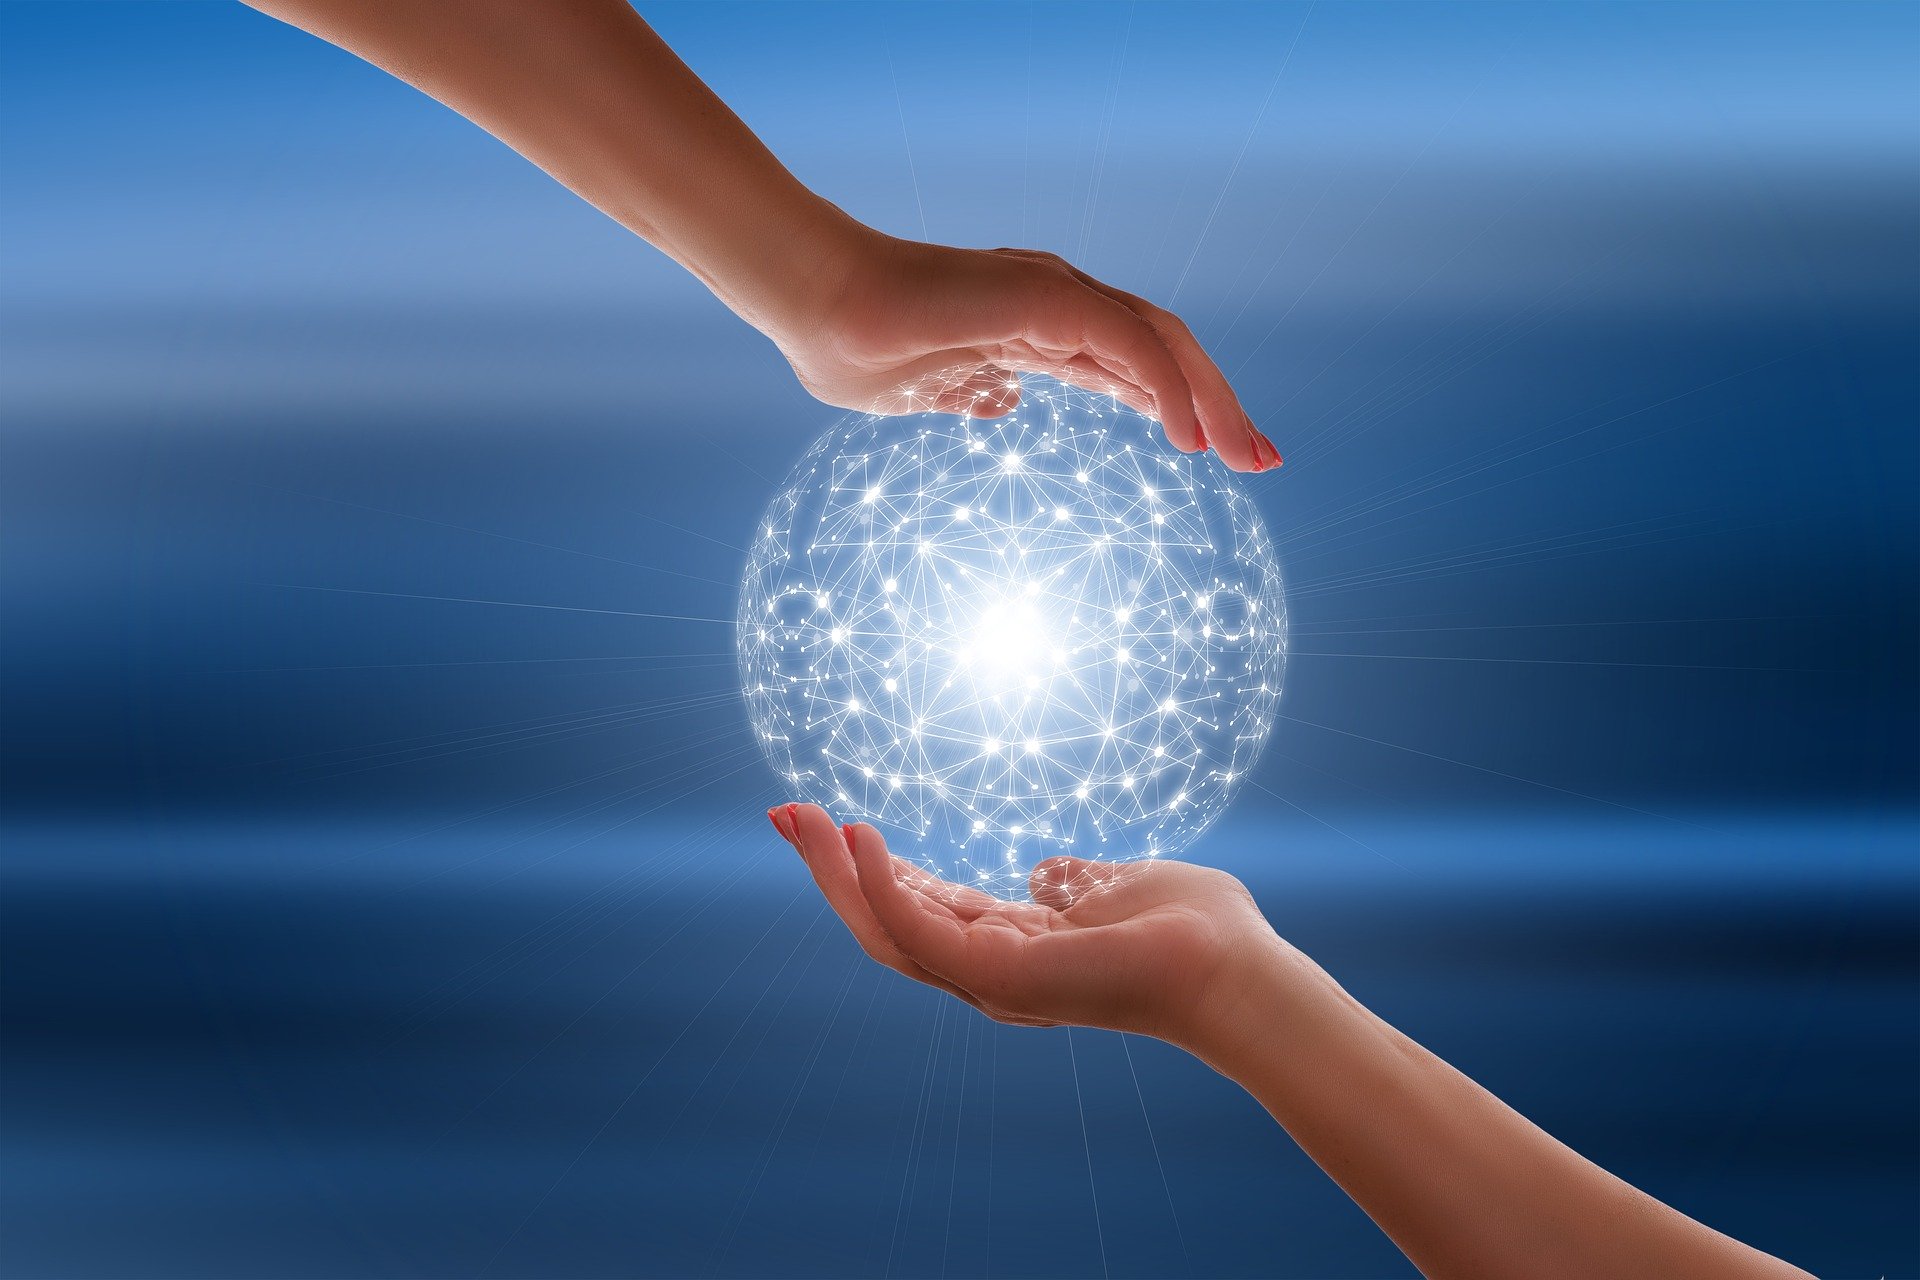 Achieving SD-WAN Network Resilience with a “Virtual Hands” Approach